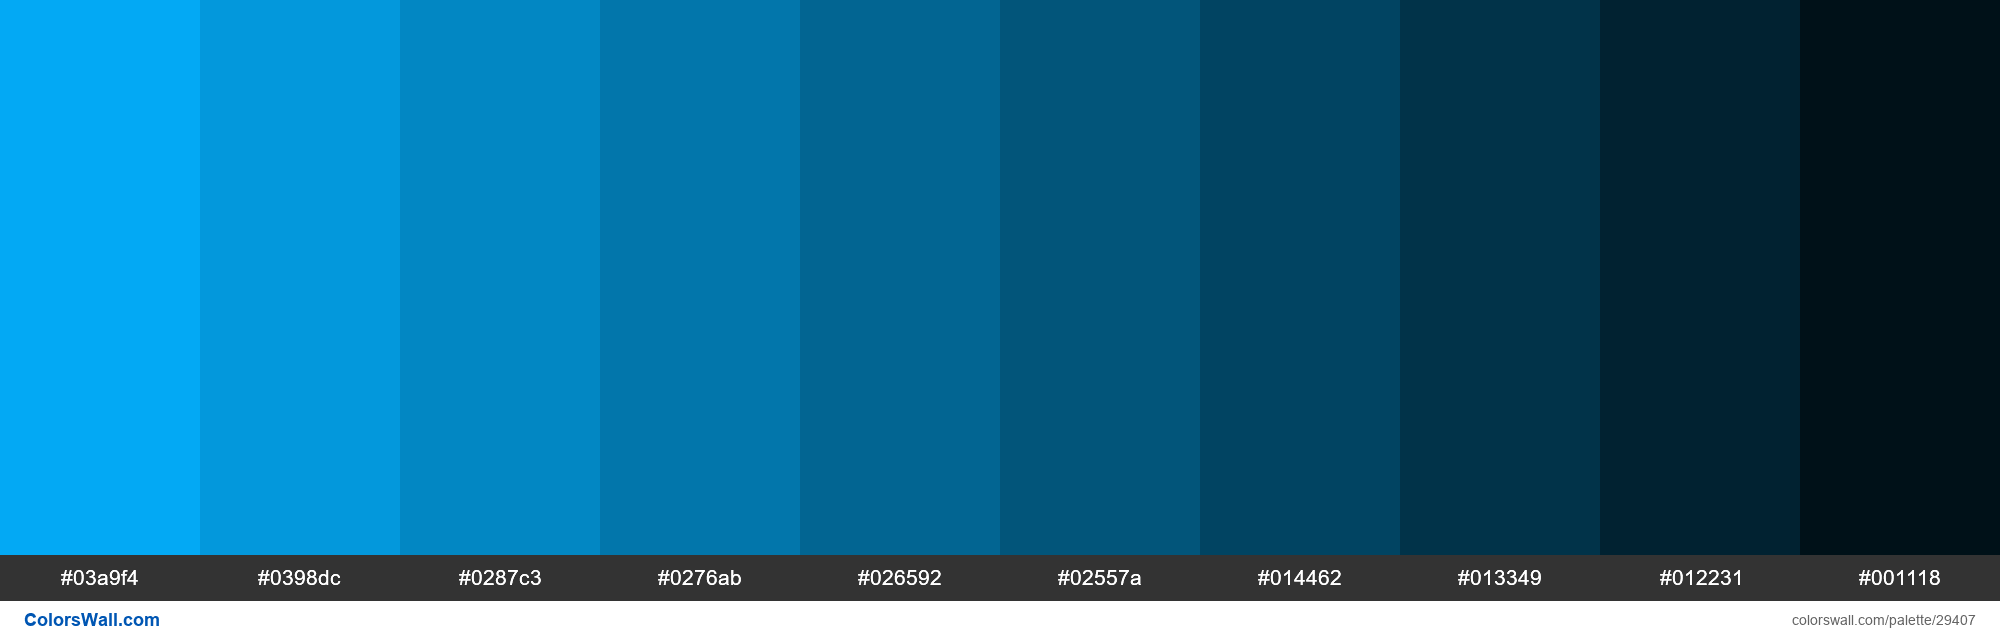 Shades Of Material Design Light Blue Color 03a9f4 Hex 29407 Colorswall 